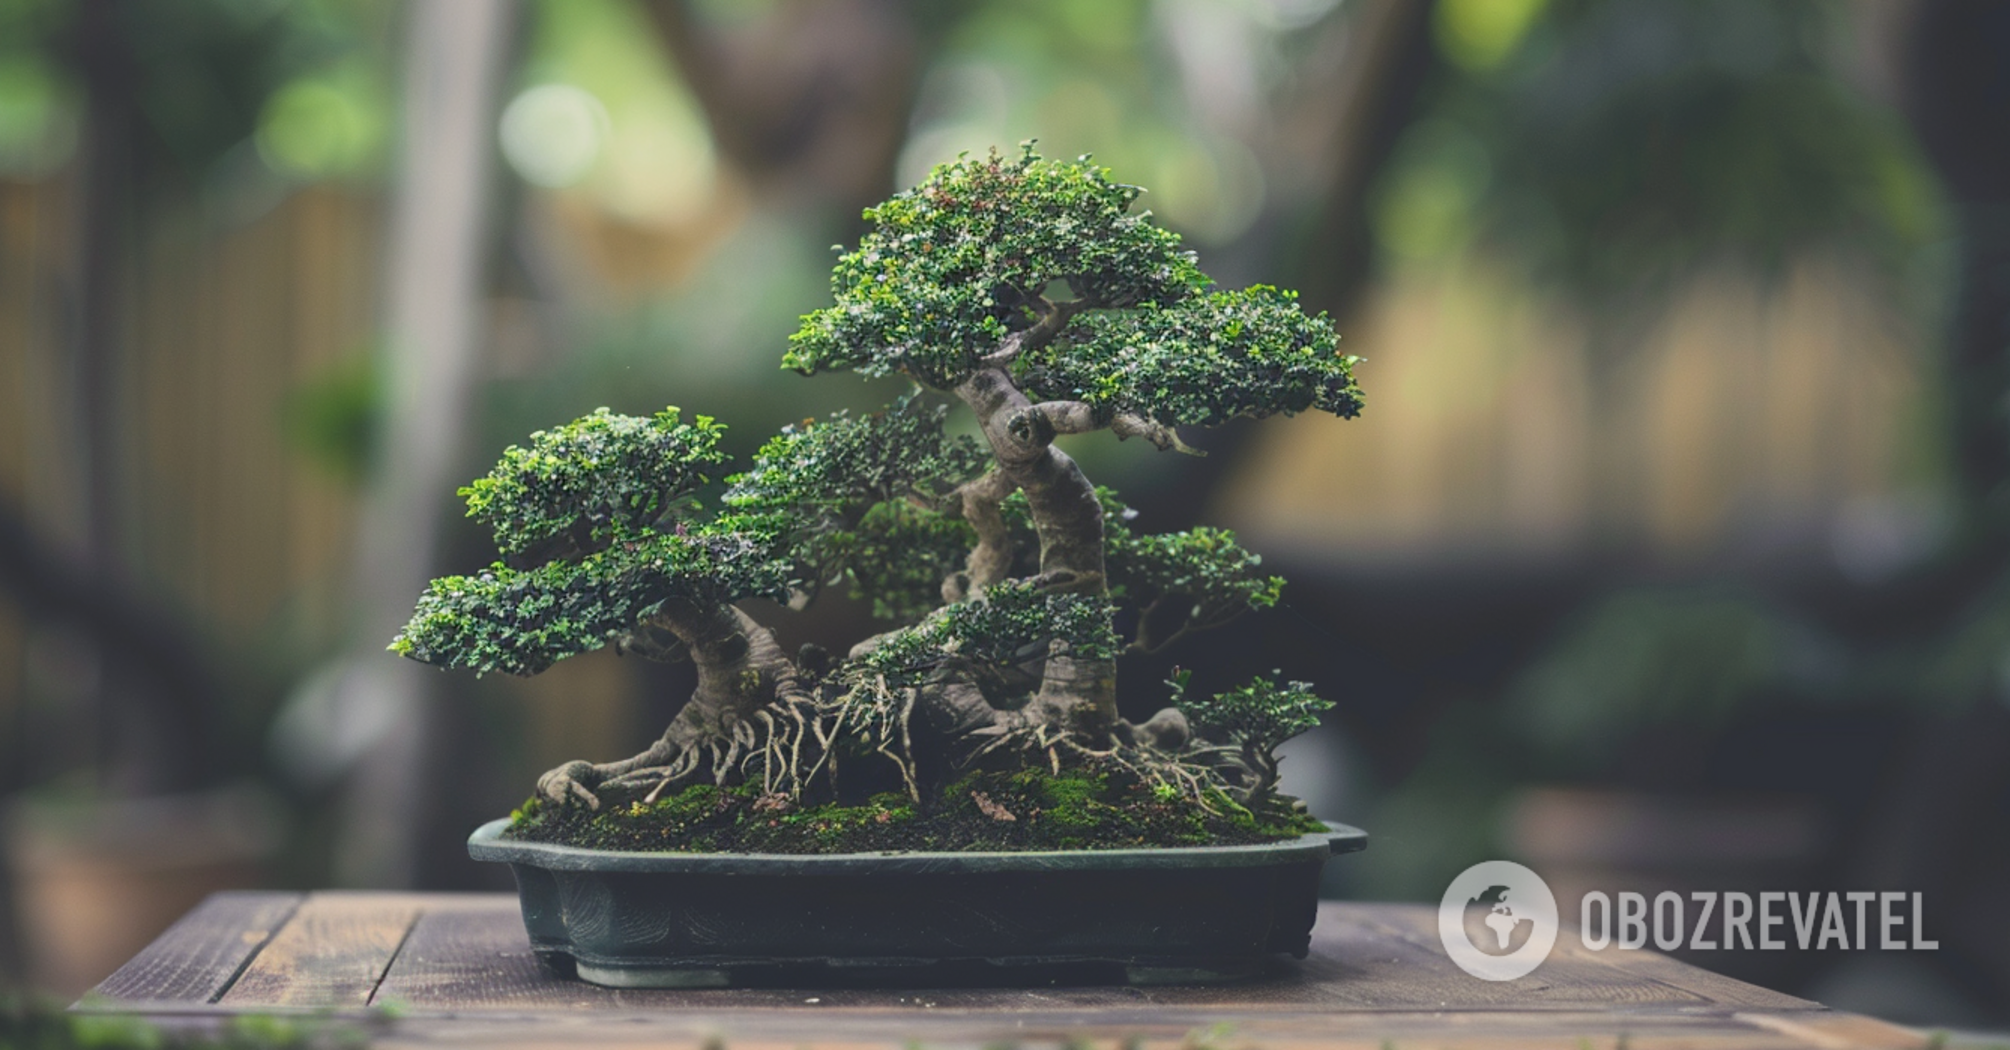 How to care for a bonsai: simple tips for beginners